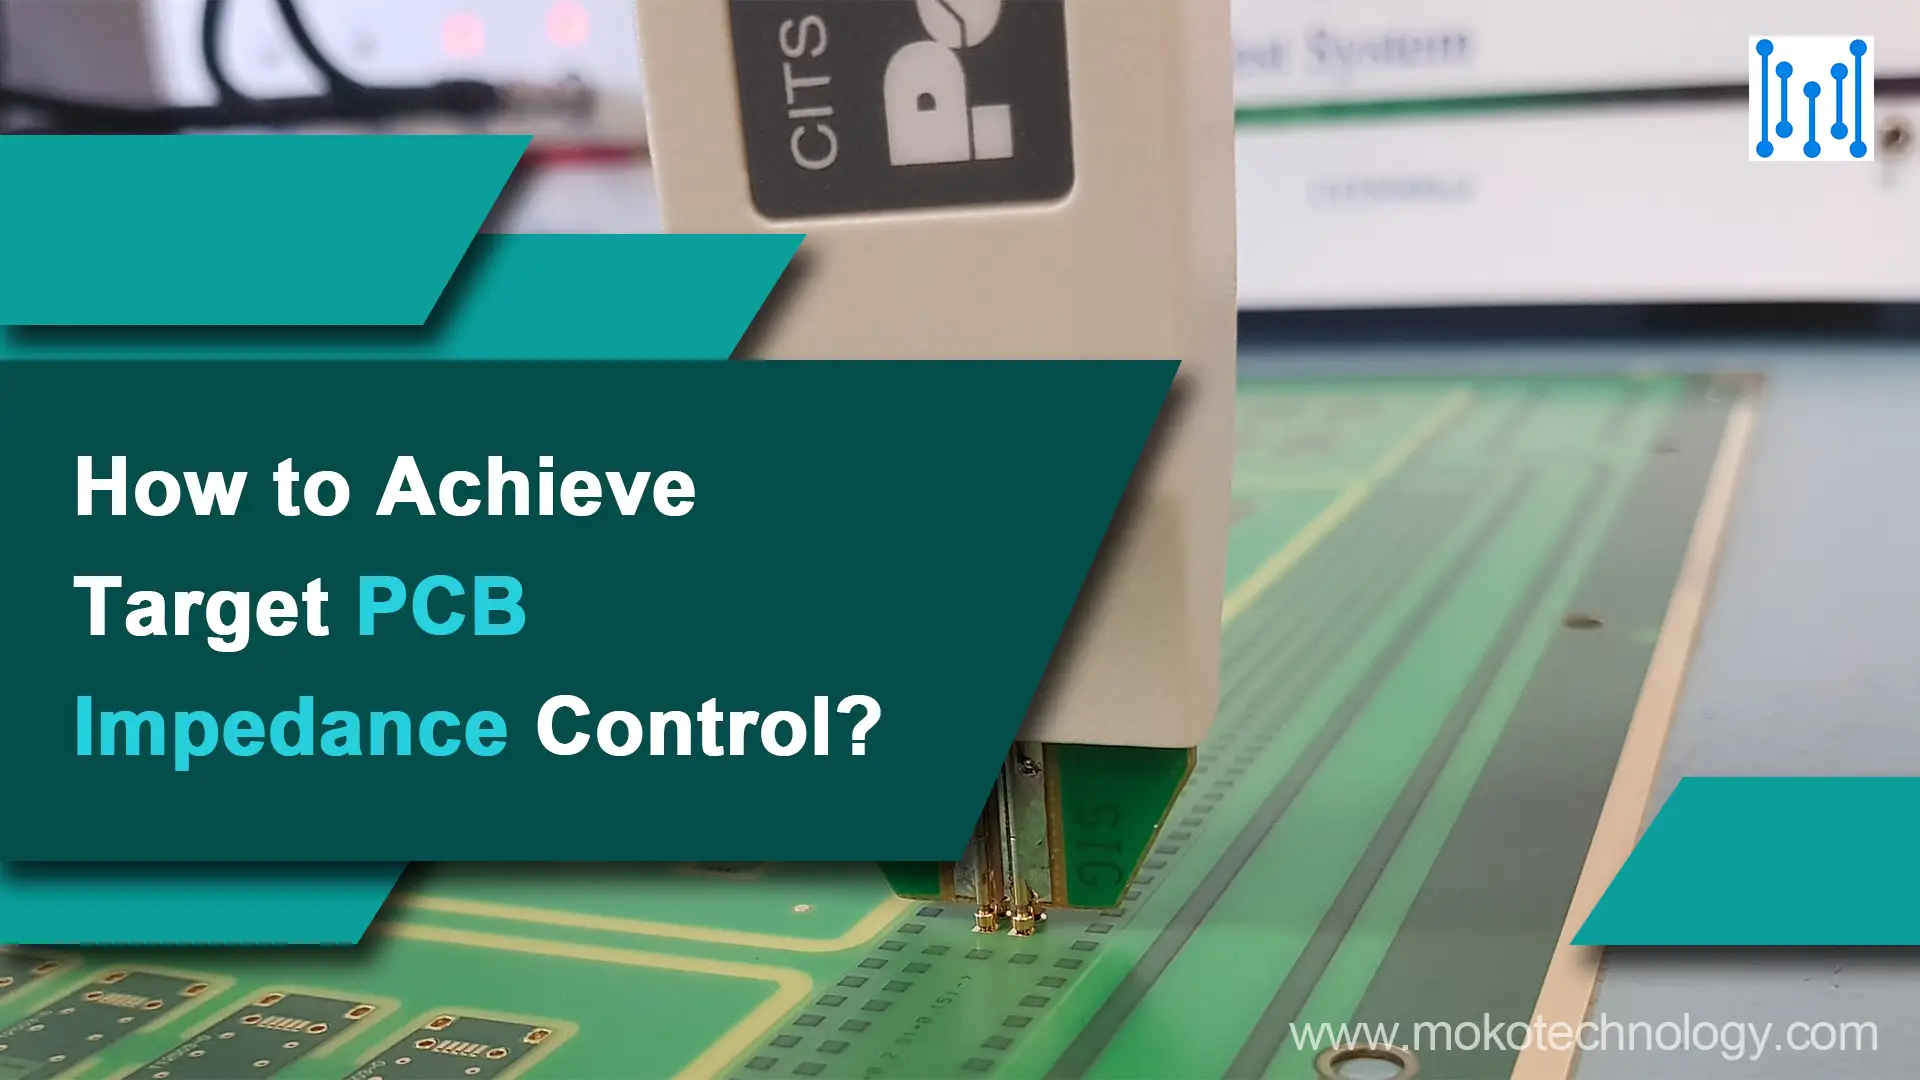 How to Achieve Target PCB Impedance Control